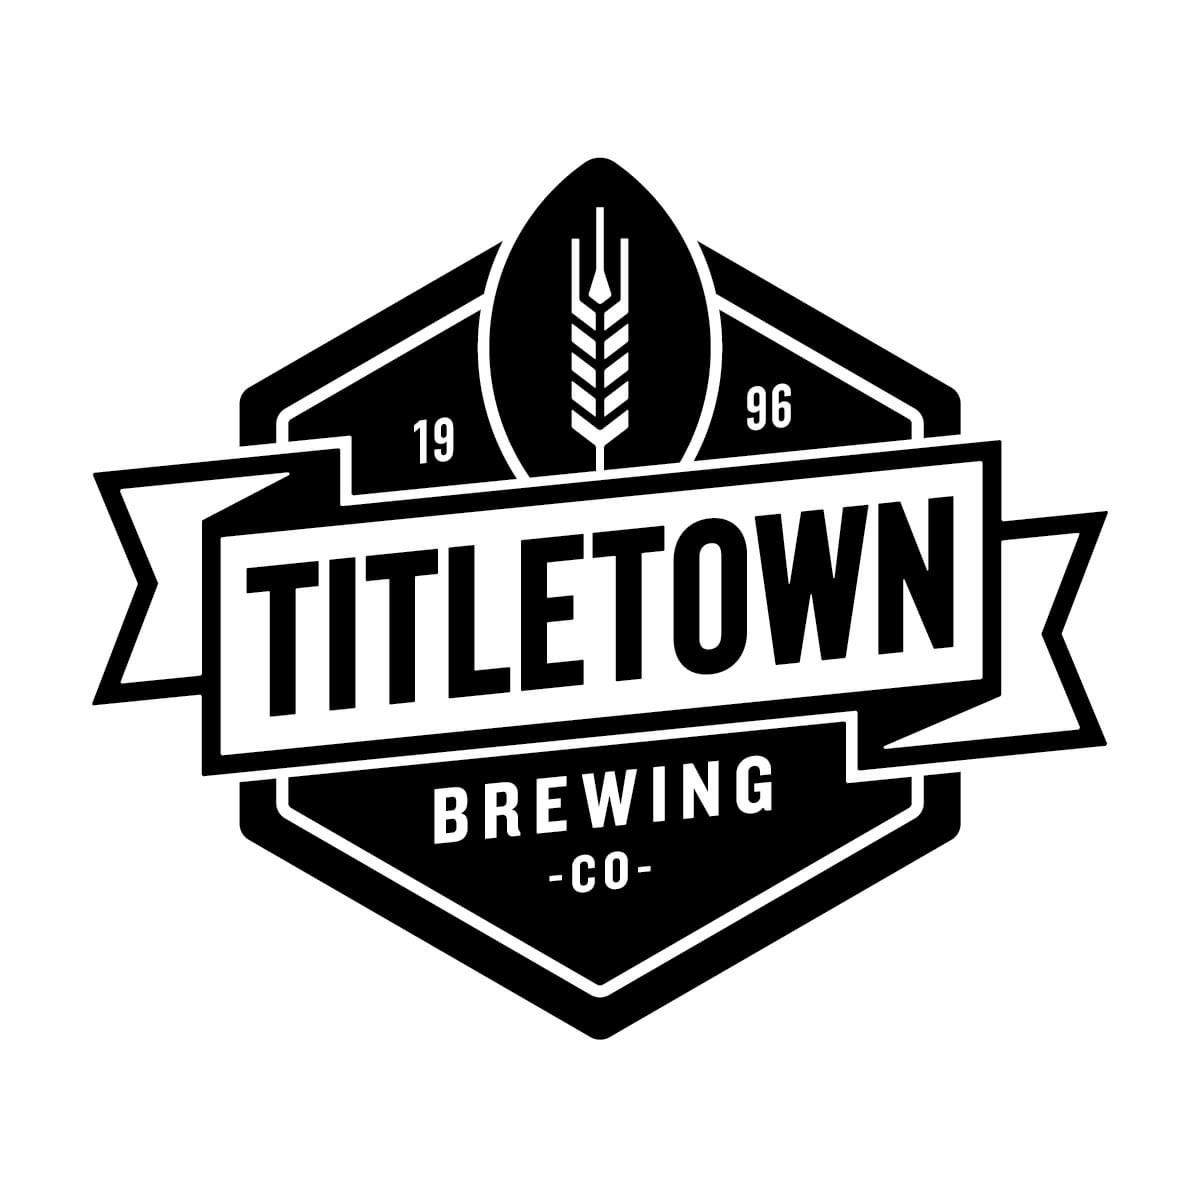 Eight Second Ride @ Titletown Brewing Company Green Bay, Wi. Friday August 30th 7:30-11pm